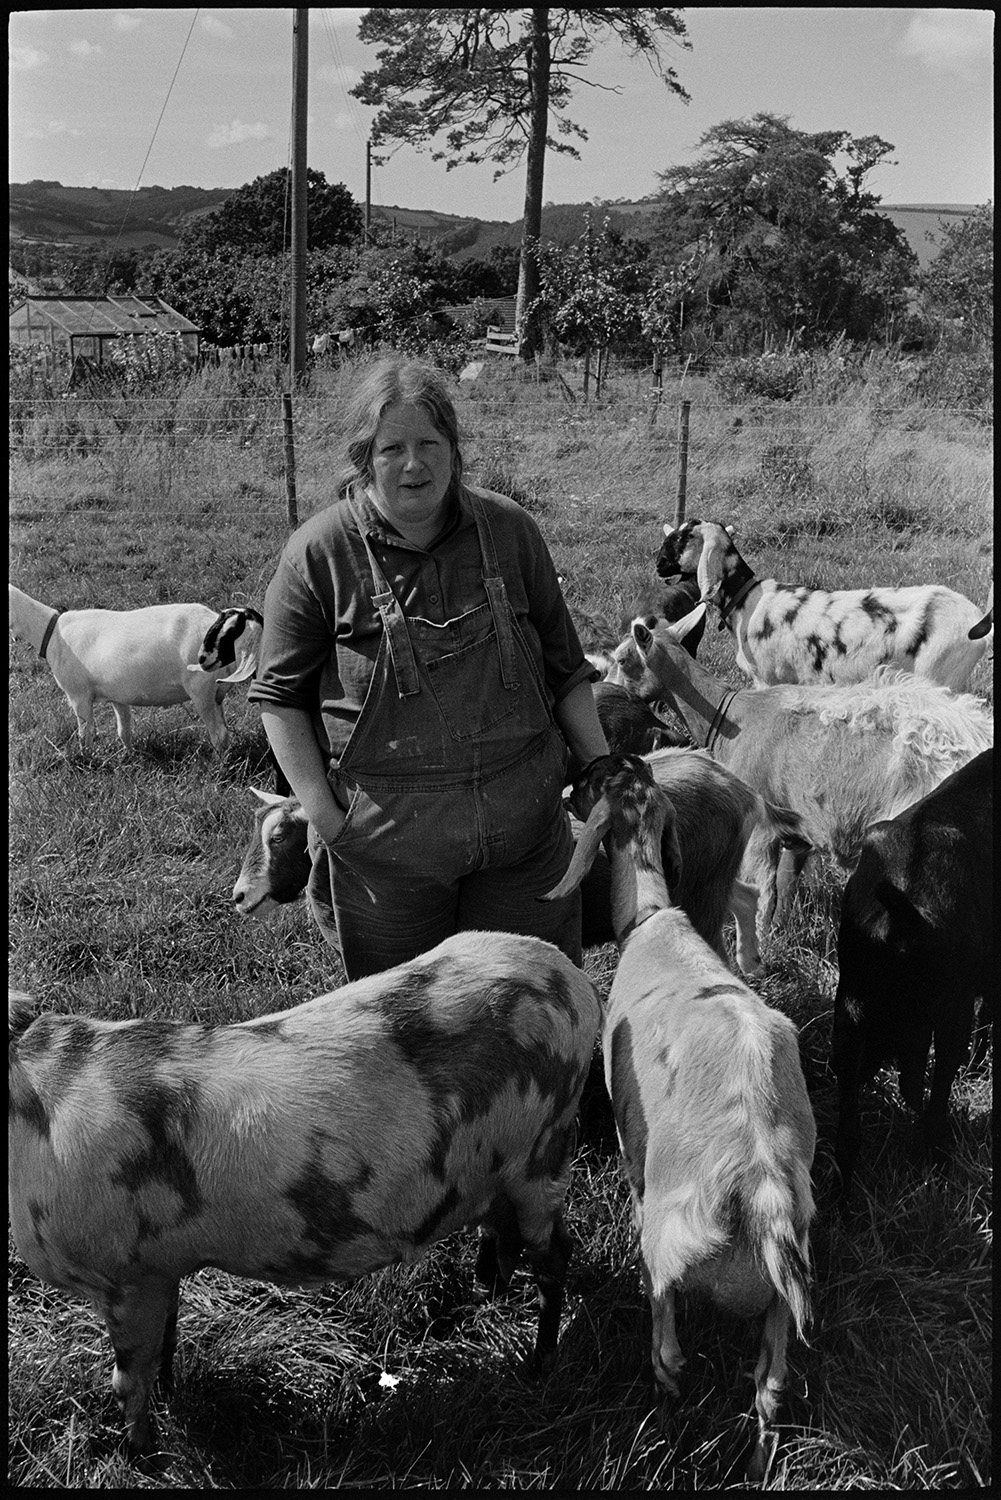 Flock of goats for cheese production. 
[Hillary Charnley with a herd of goats in a field at Park Farm, Umberleigh. Their milk was used to make cheese.]